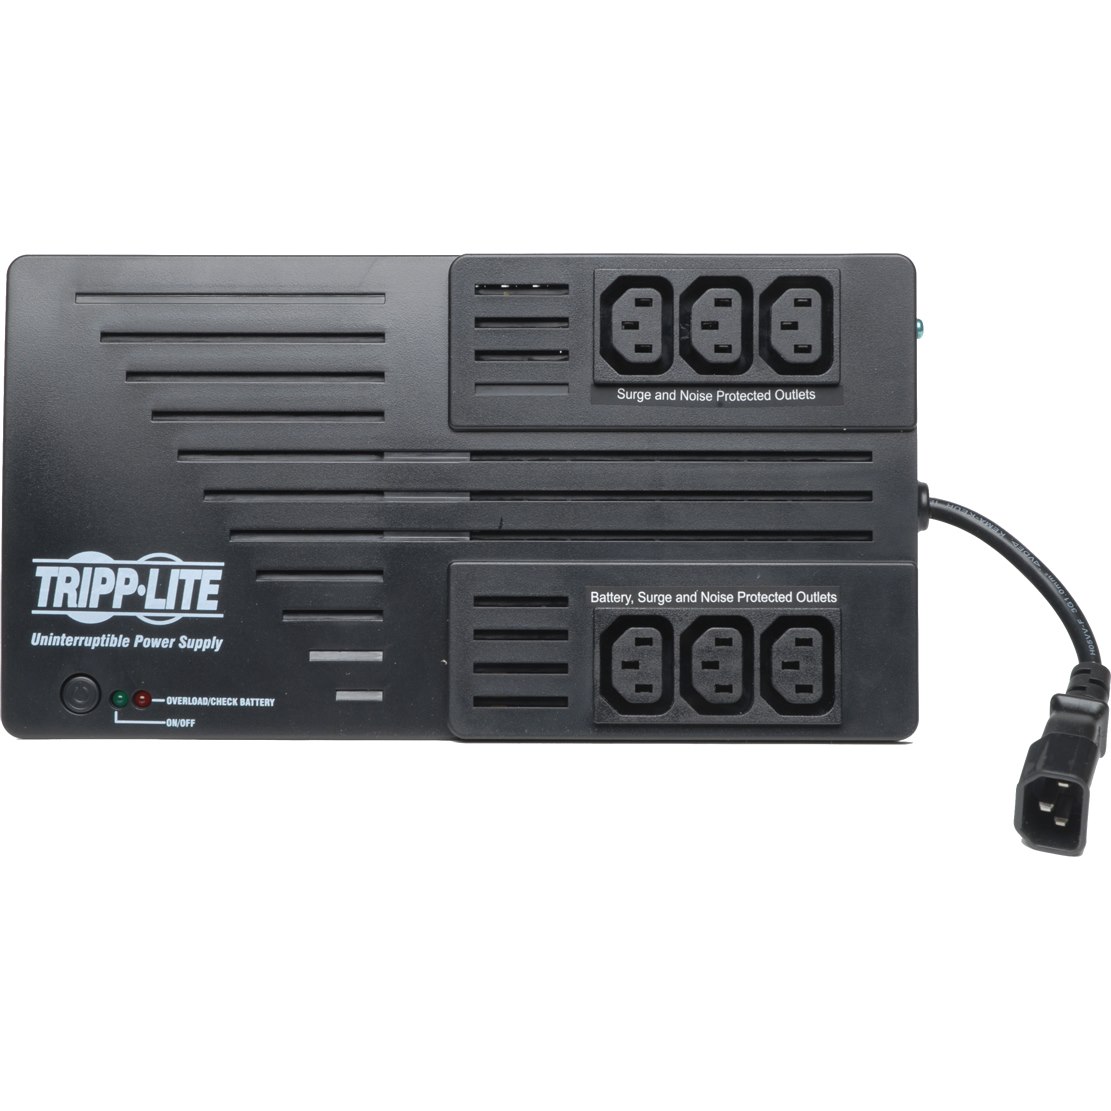 Tripp Lite by Eaton UPS AVR Series 230V 550VA 300W Ultra-Compact Line-Interactive UPS with USB port C13 Outlets